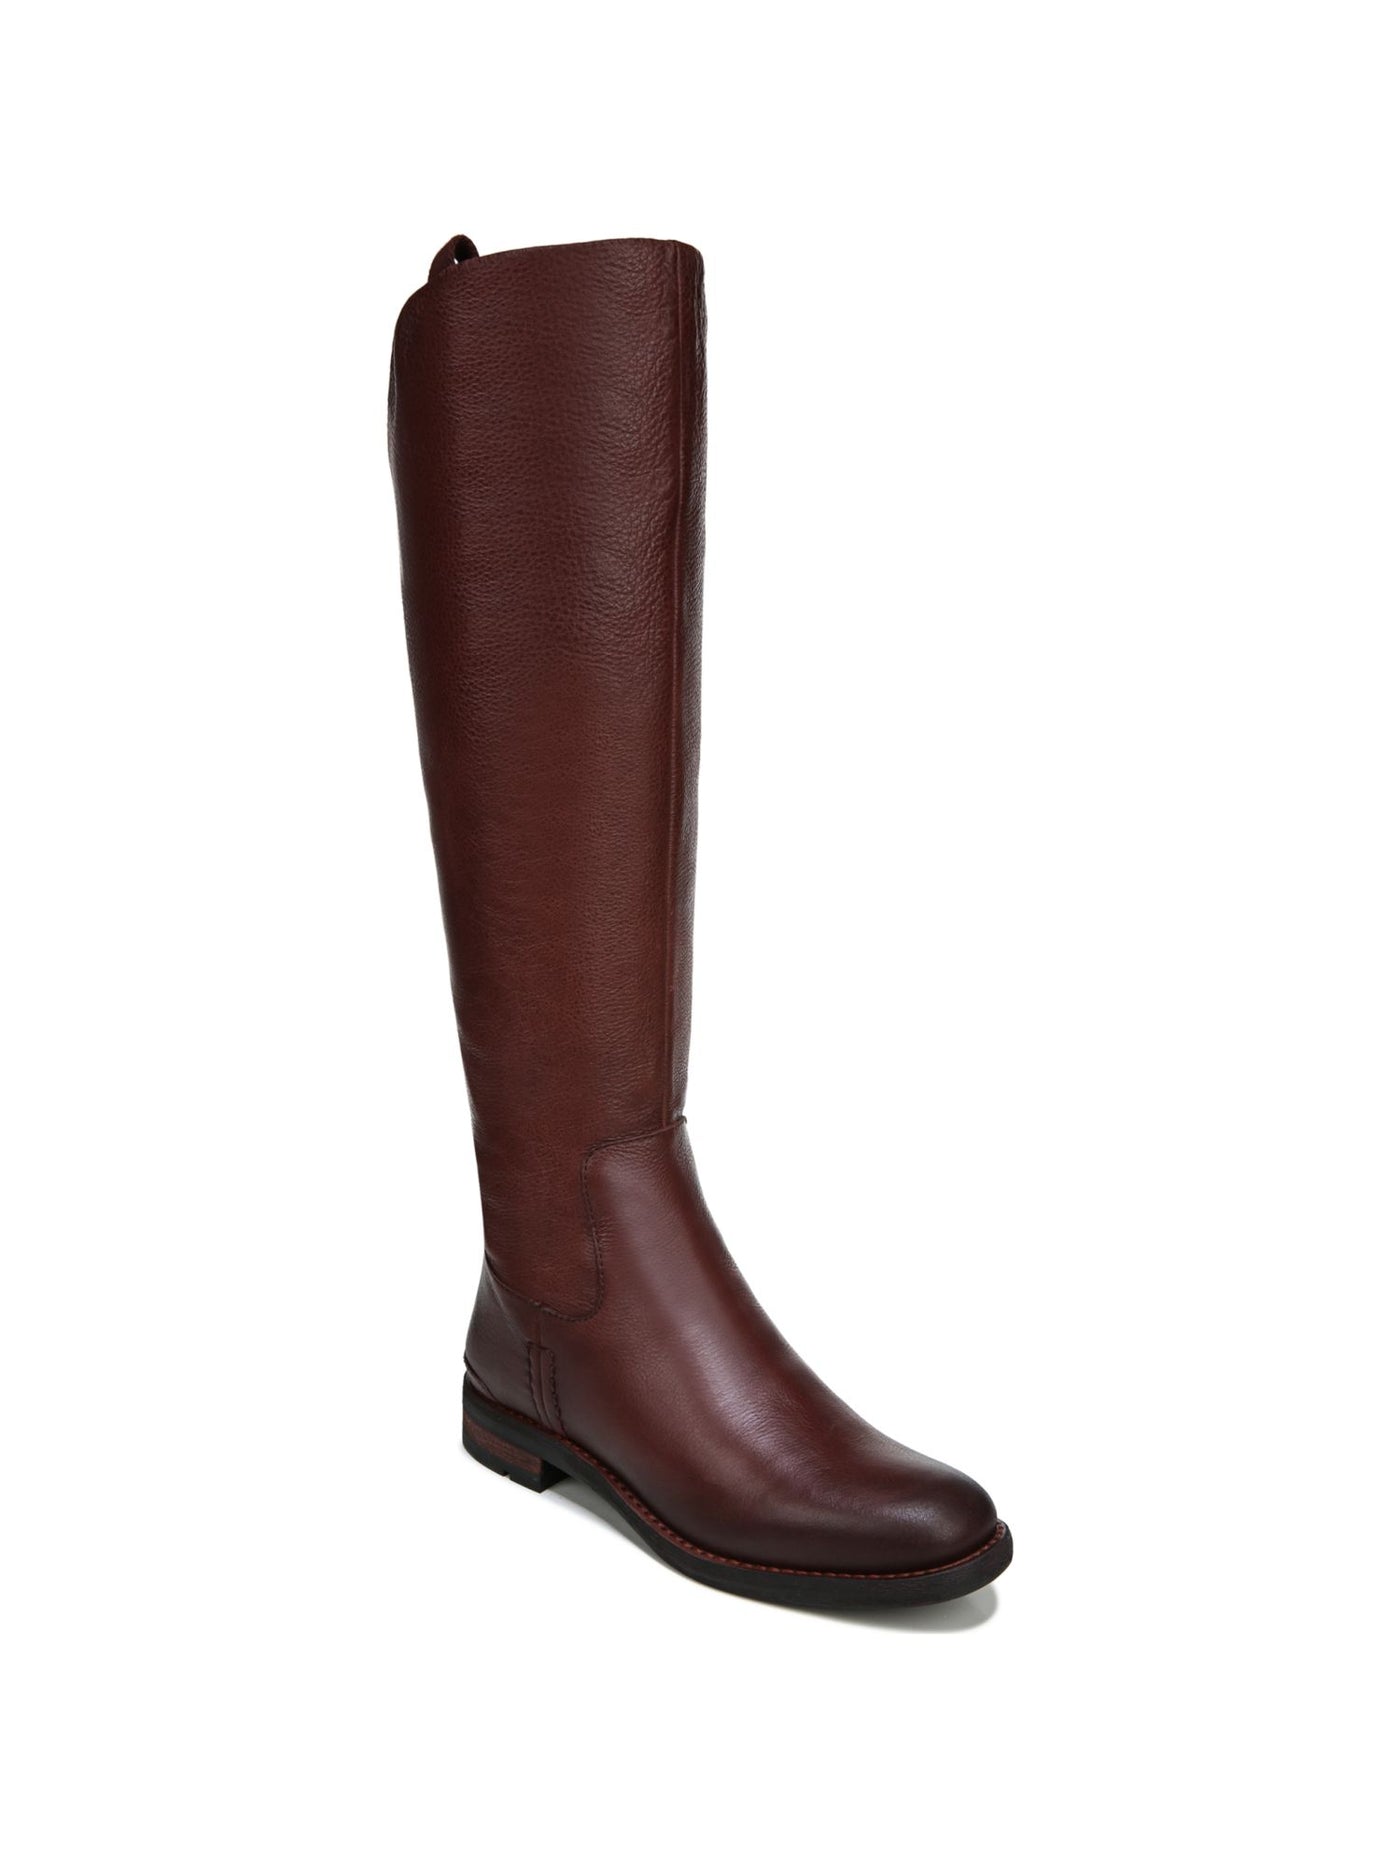 FRANCO SARTO Womens Maroon Stitch Detailing Padded Meyer Almond Toe Block Heel Zip-Up Leather Riding Boot 9.5 W